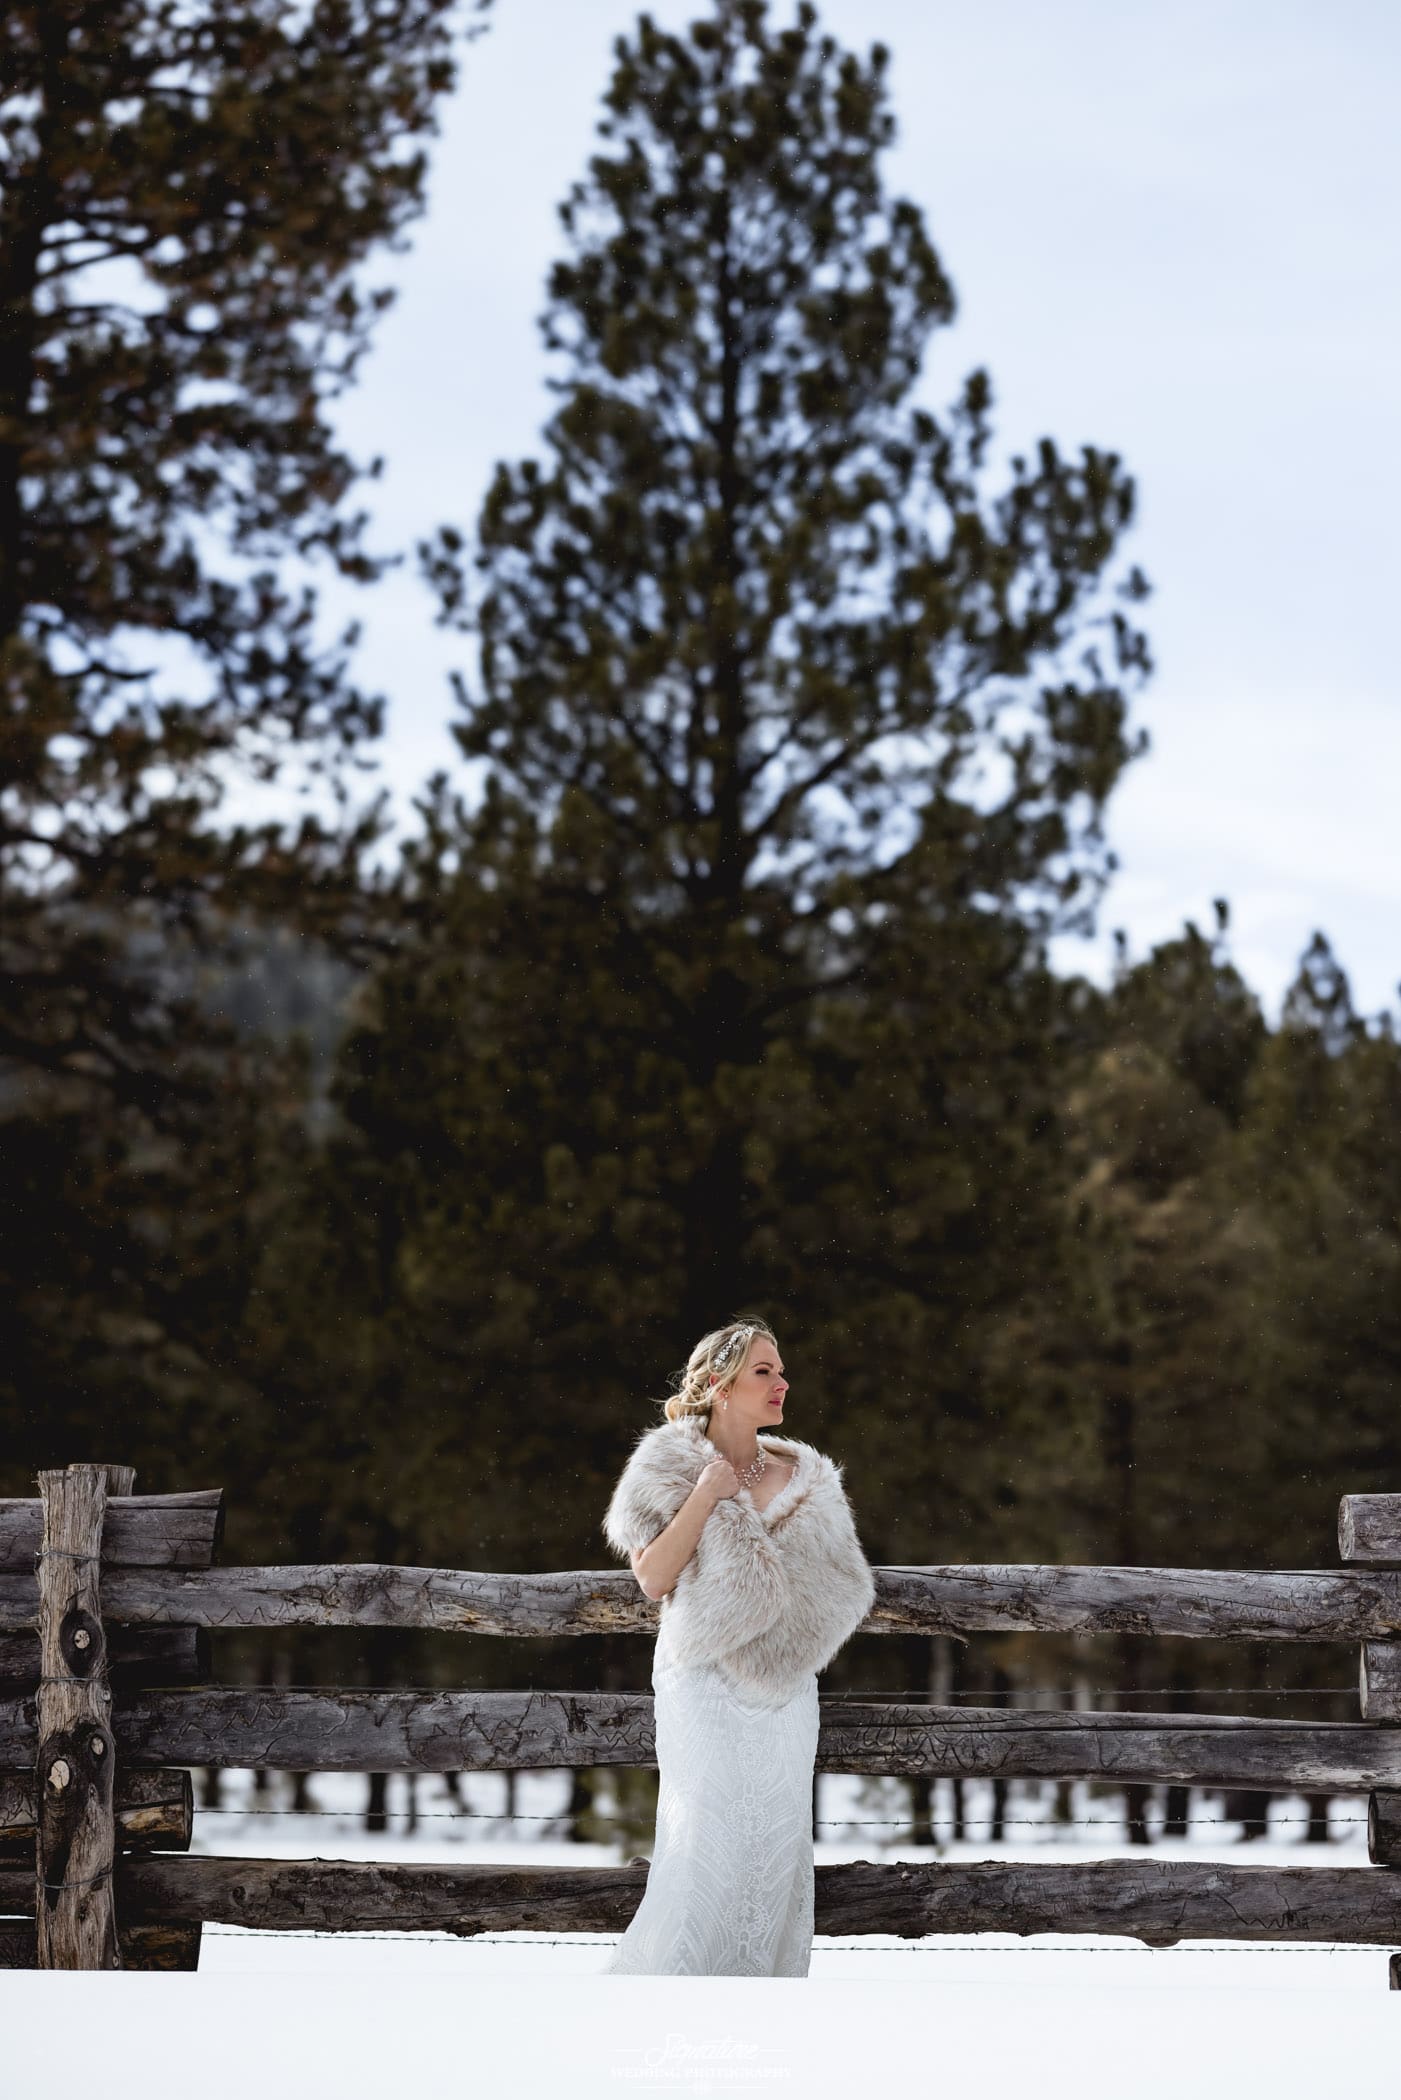 Bride in front of wooden fence